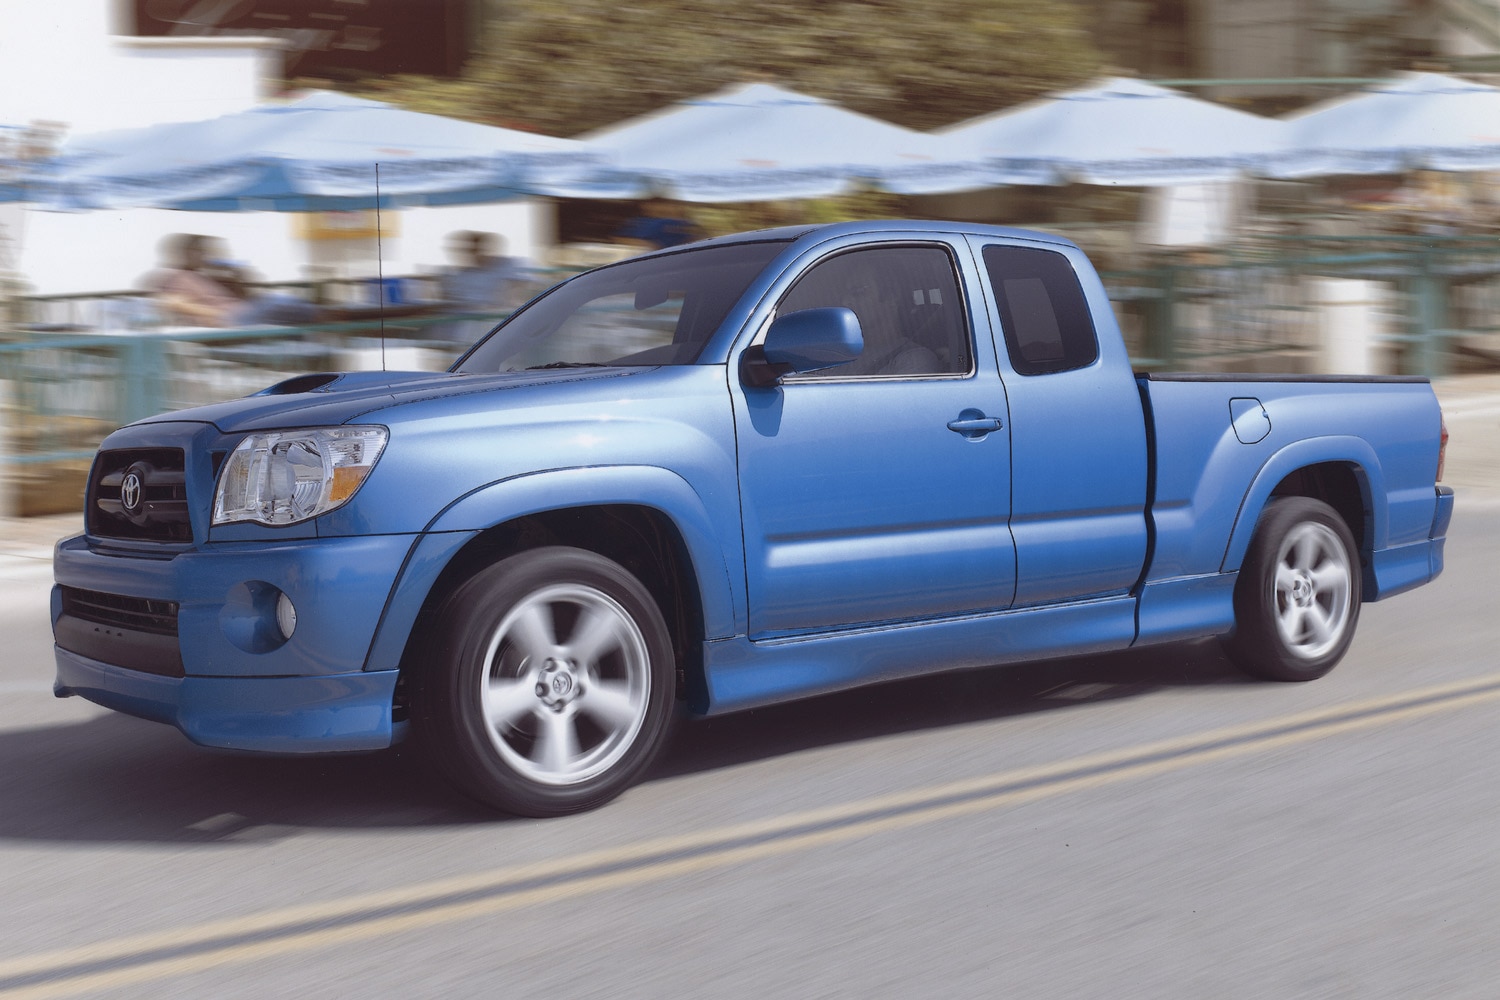  Side view of a blue 2005 Toyota Tacoma X-Runner